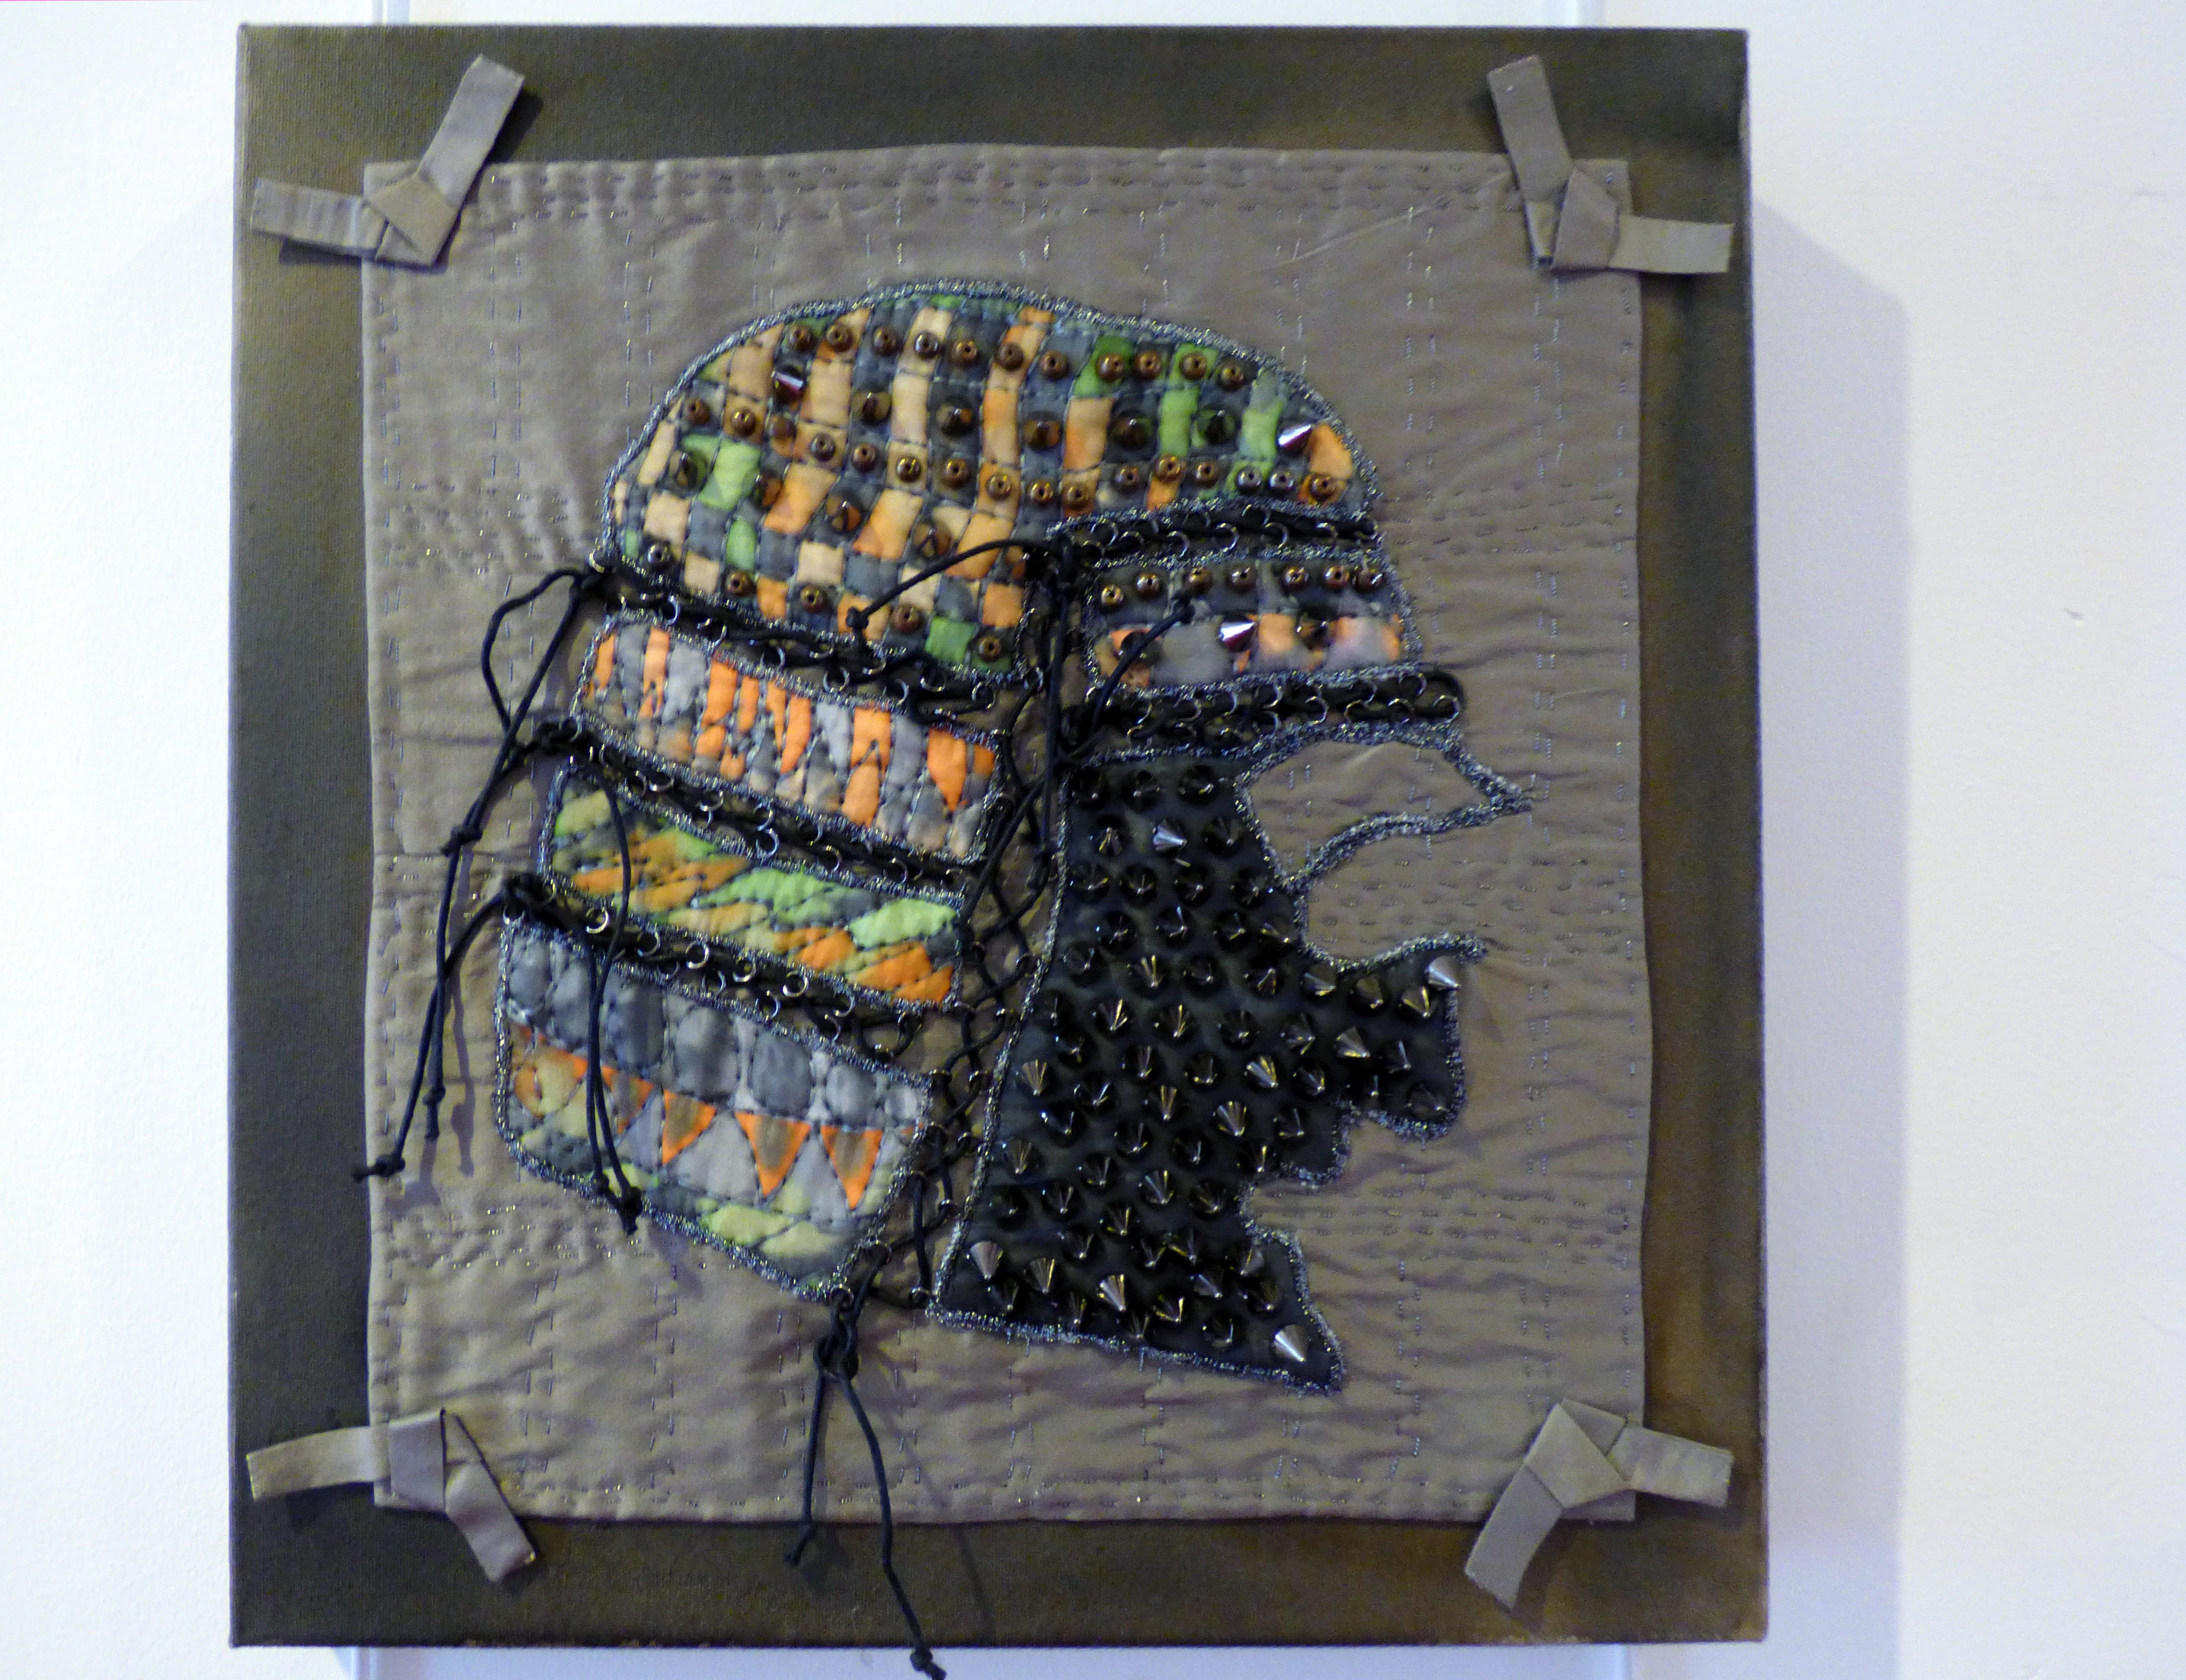 SAMURAI 1 by Marilyn McNiell, Textile Art Group exhibition, Leeds 2016